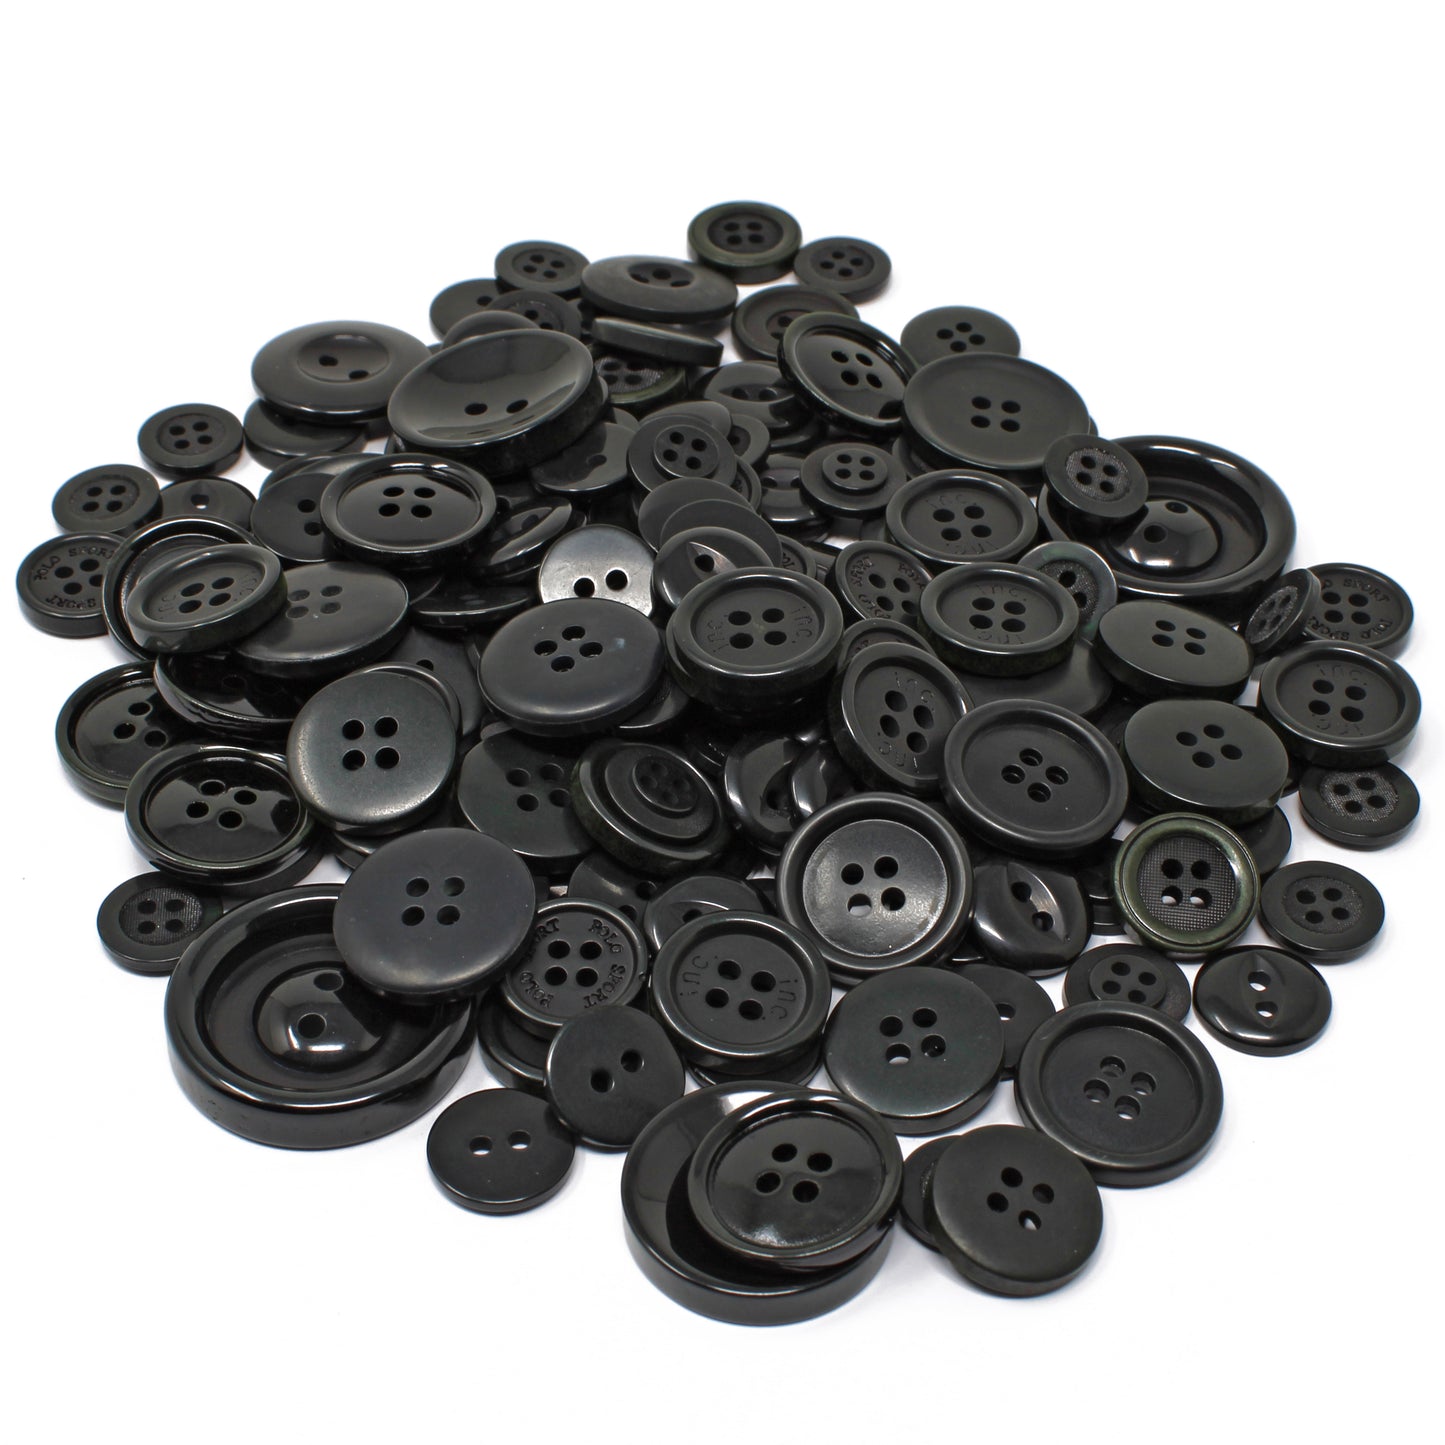 Black 100g Bags Of Mix Acrylic & Resin Buttons